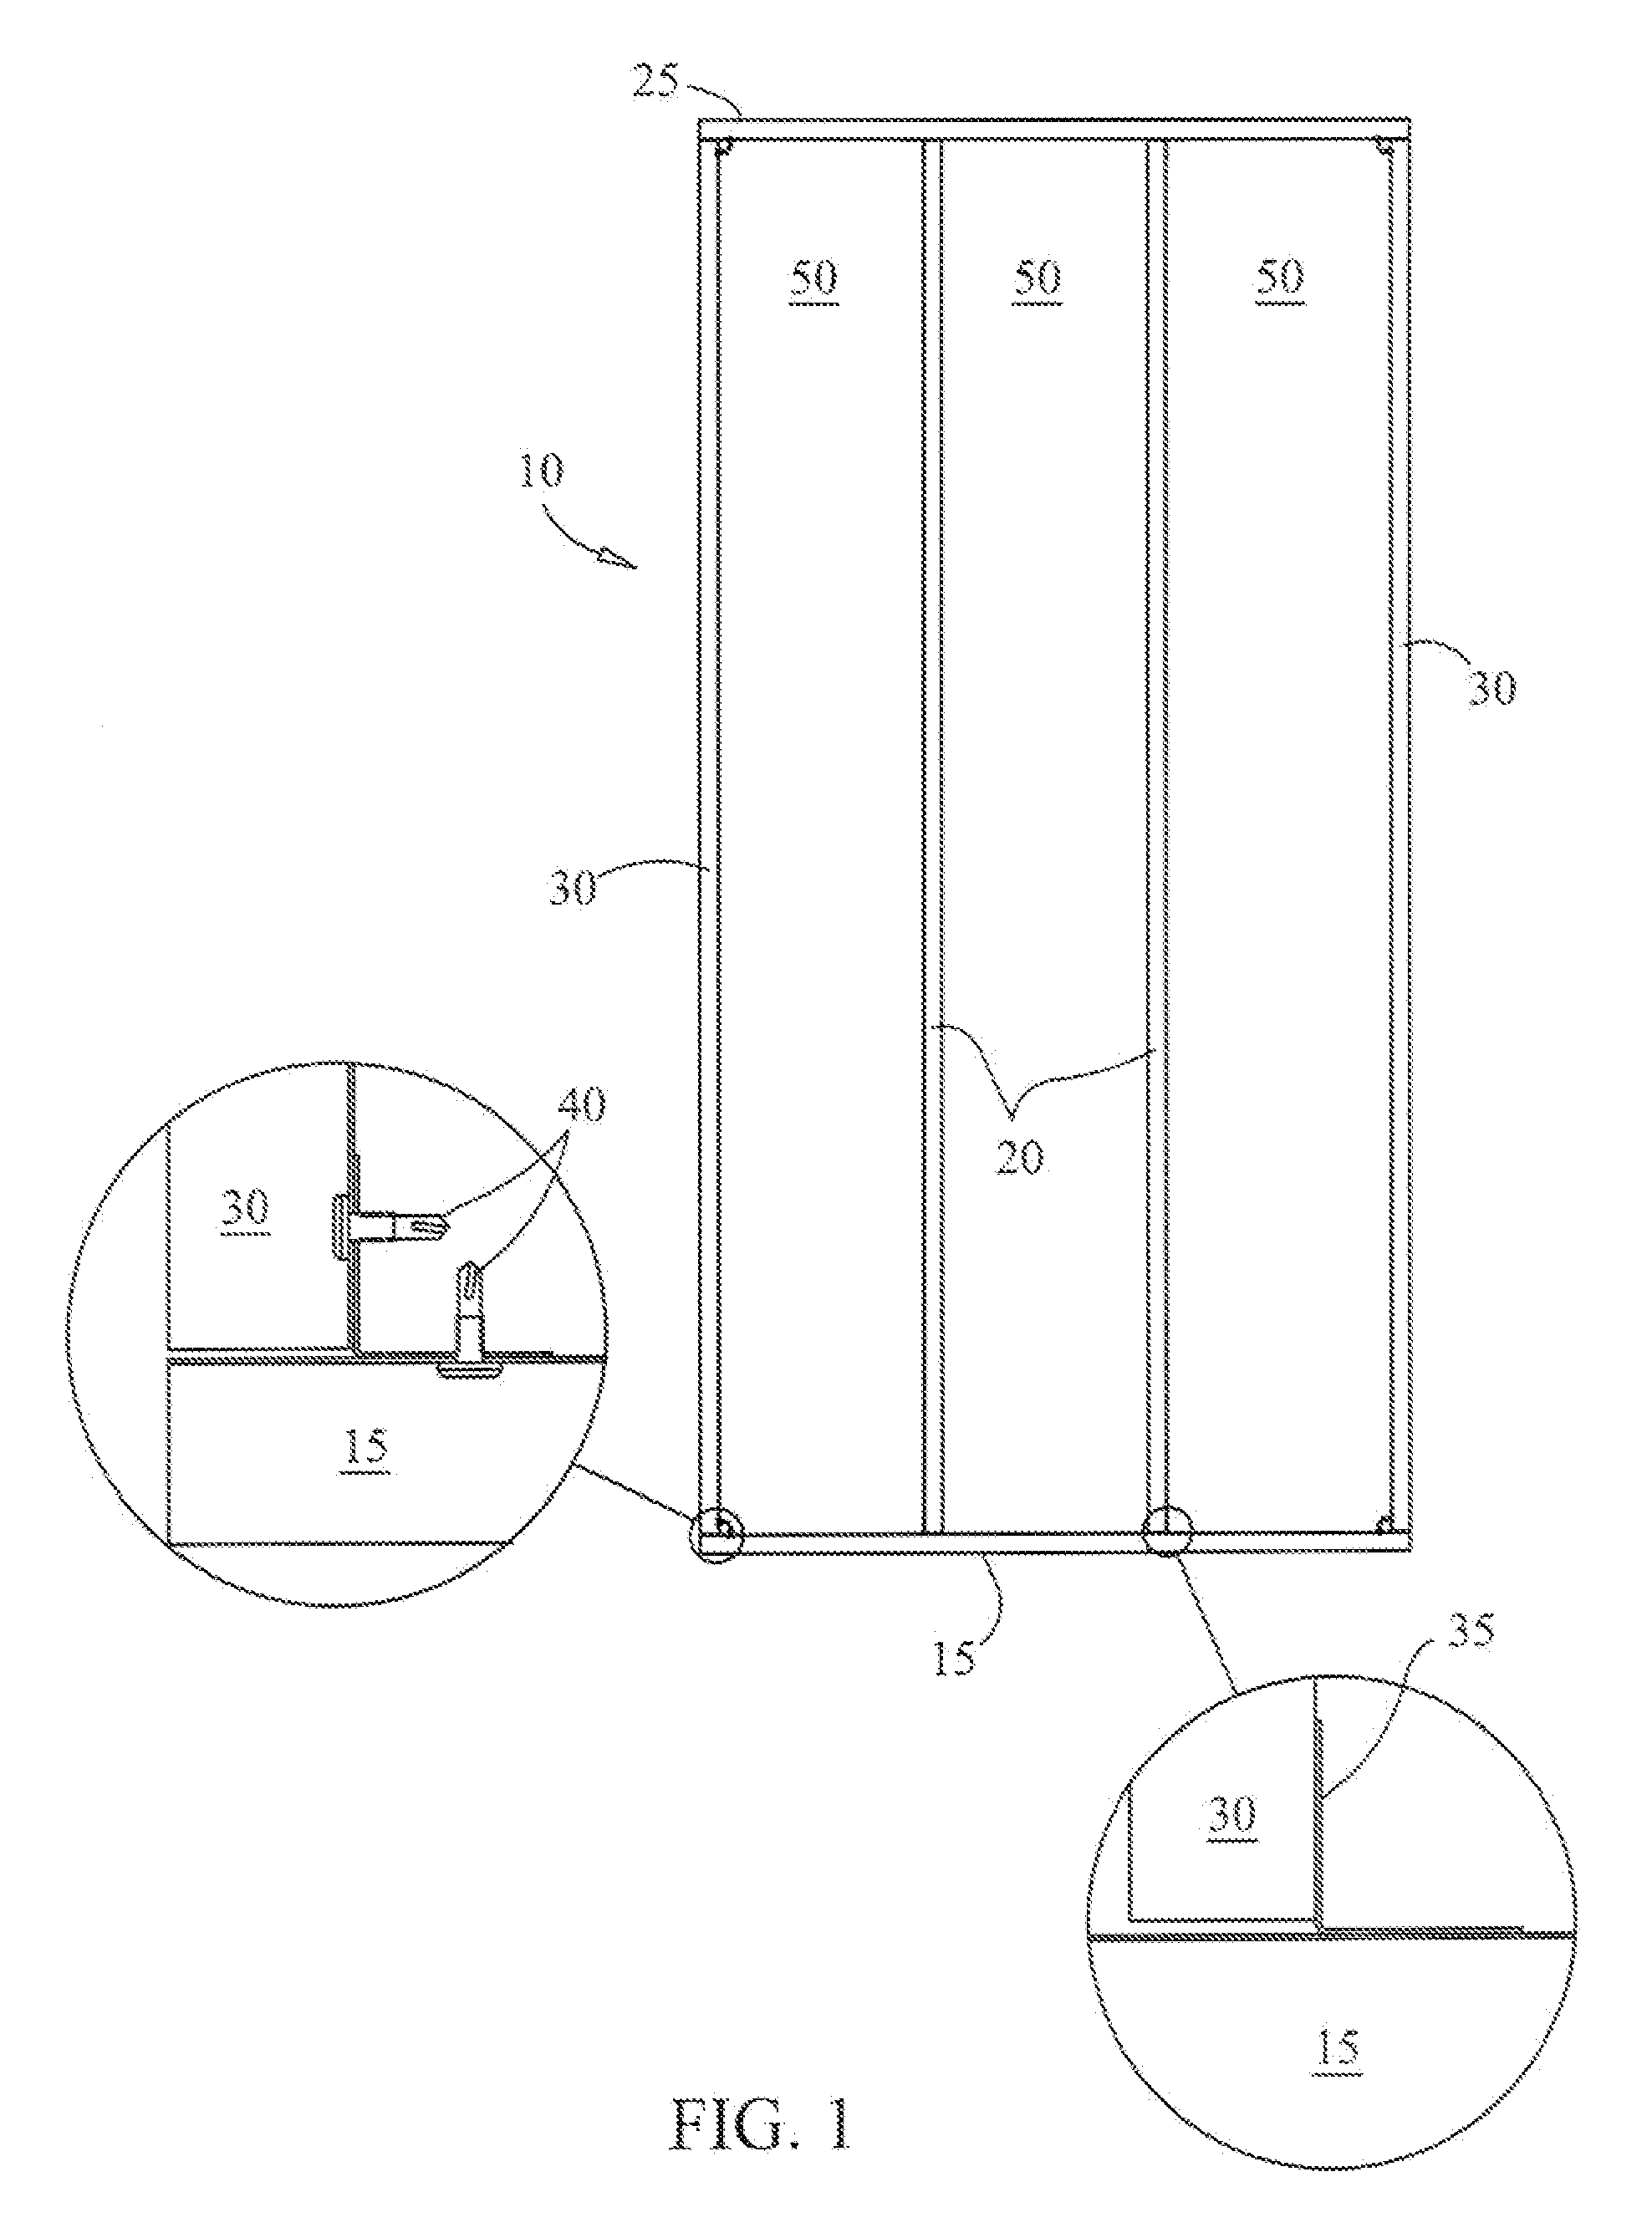 Method and system for constructing pre-fabricated building